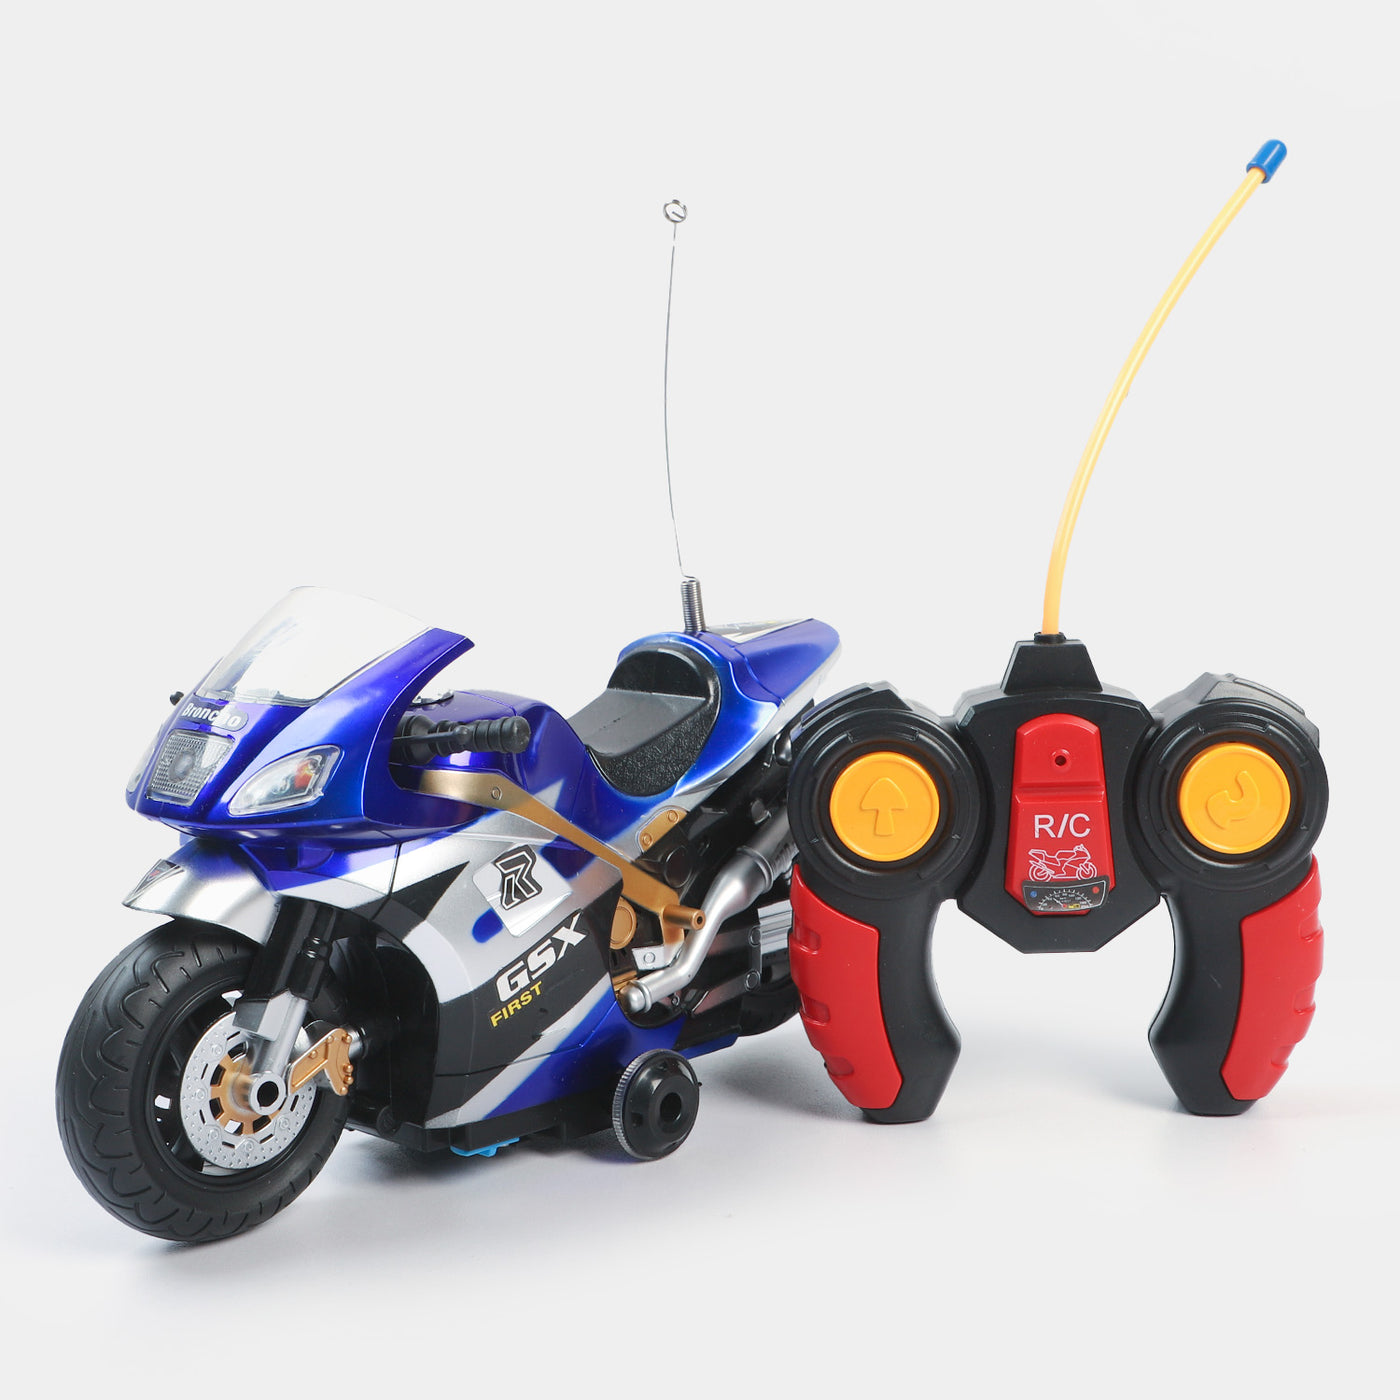 Remote Control Motorcycle Bike Toy For kids Price in Pakistan